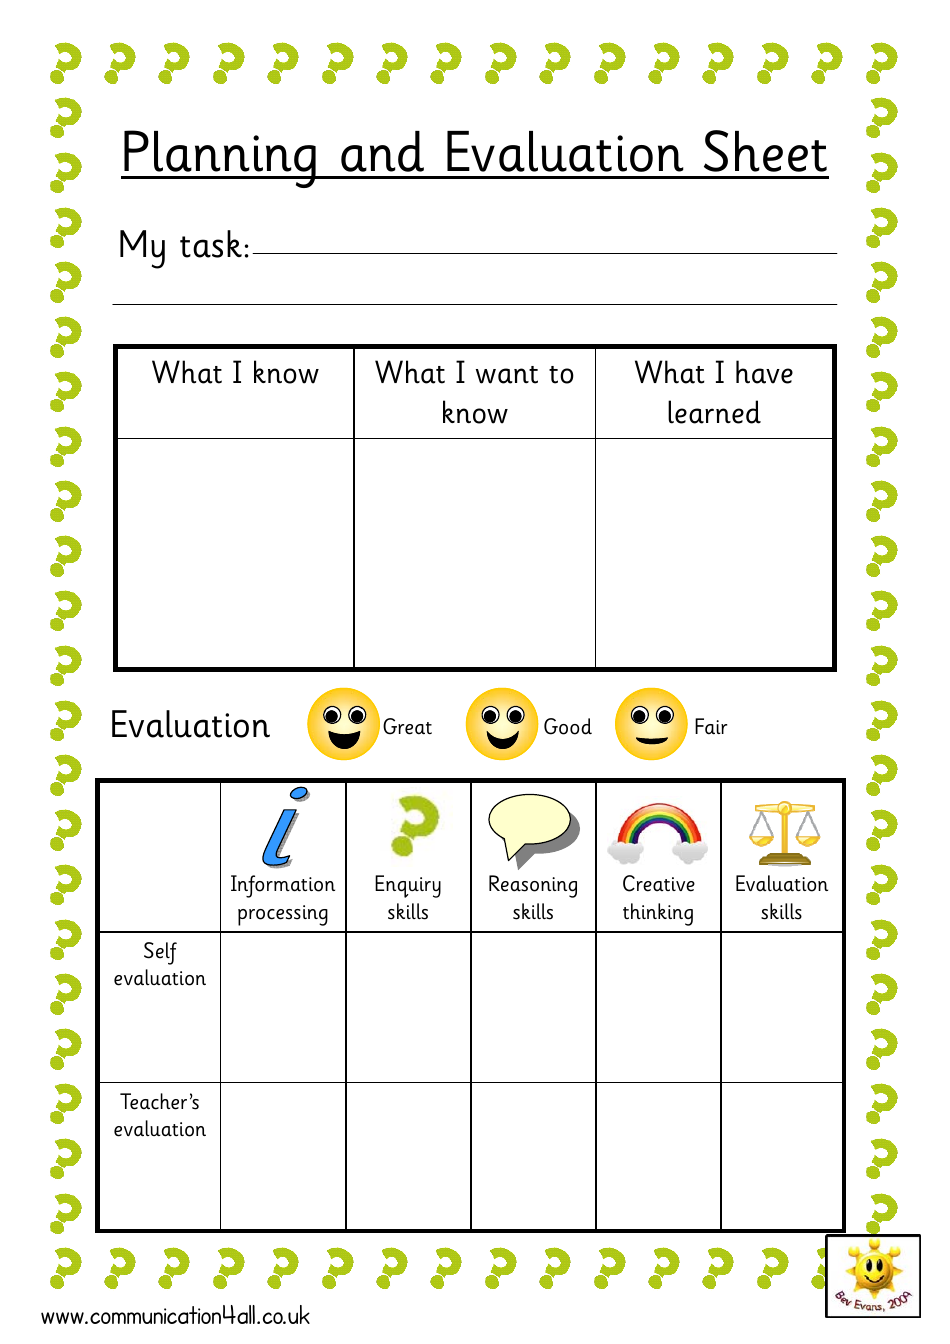 A Planning and Evaluation Sheet icon featuring a clipboard and a checklist document